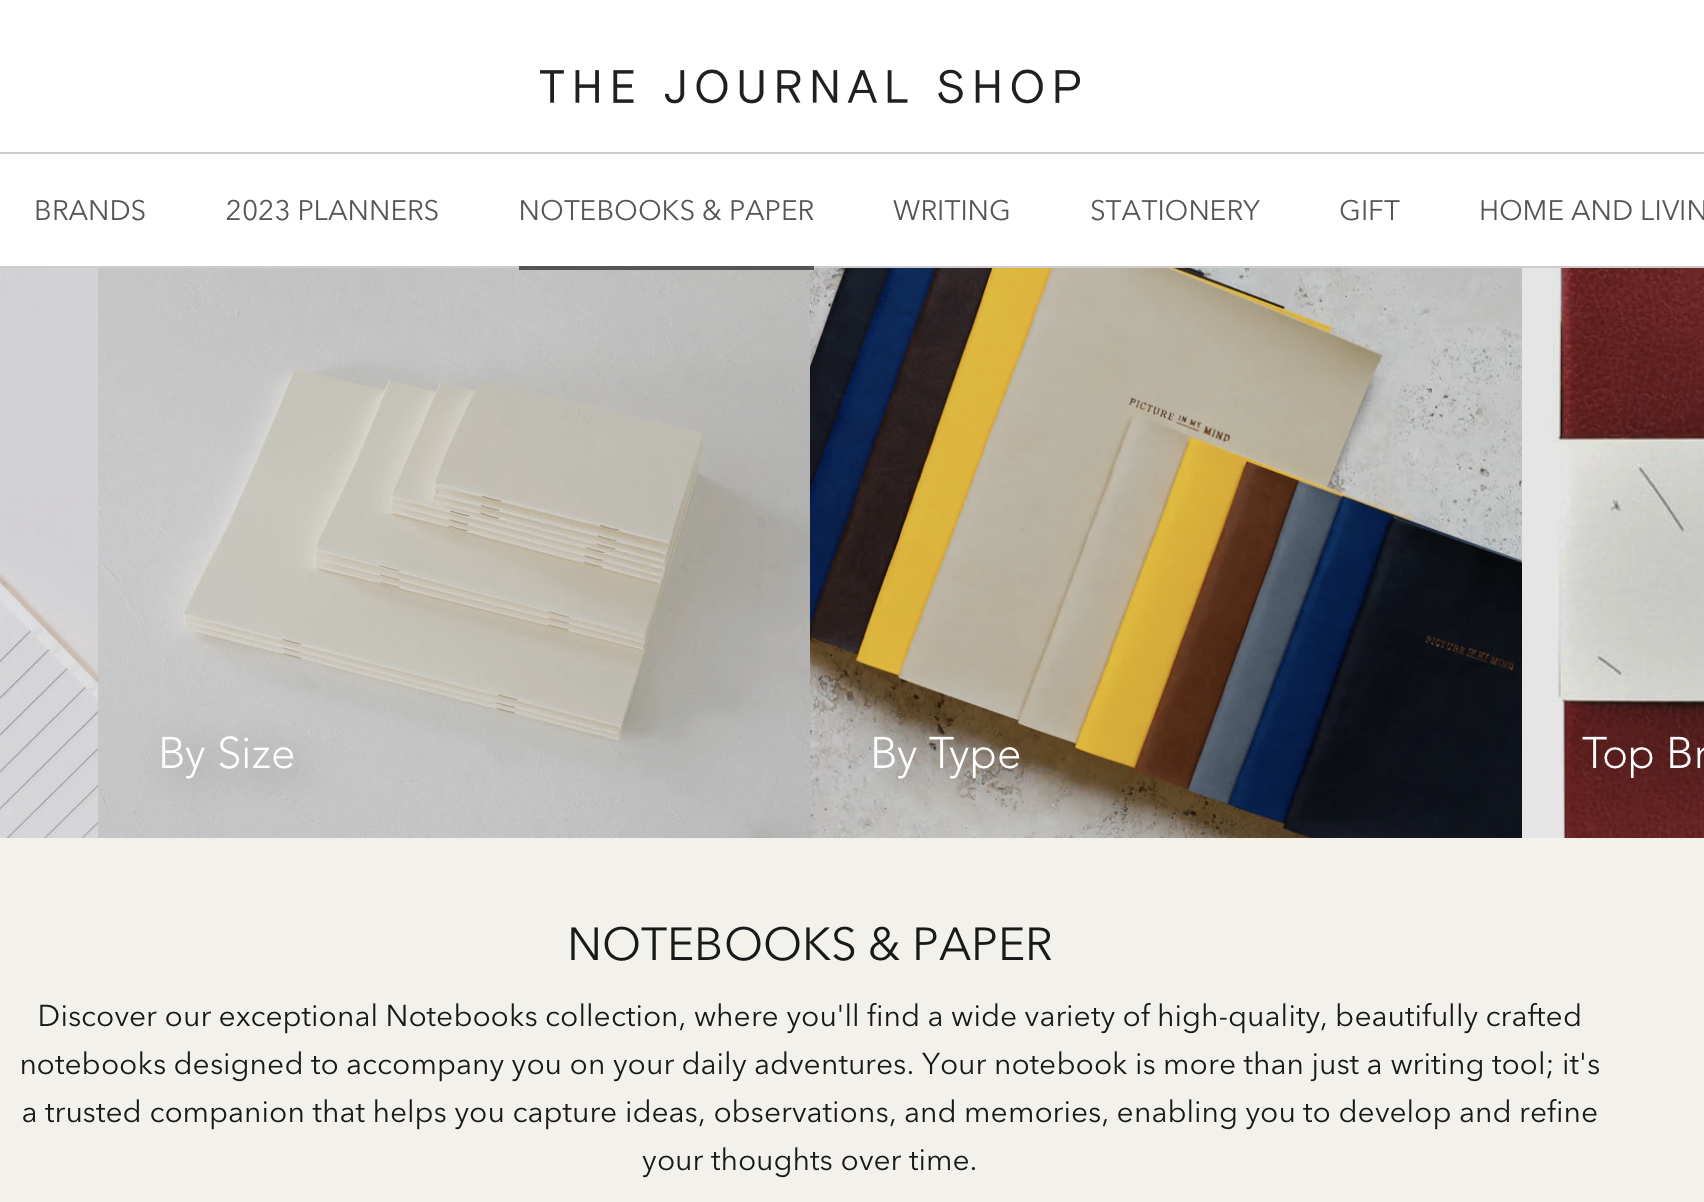 The Journal Shop